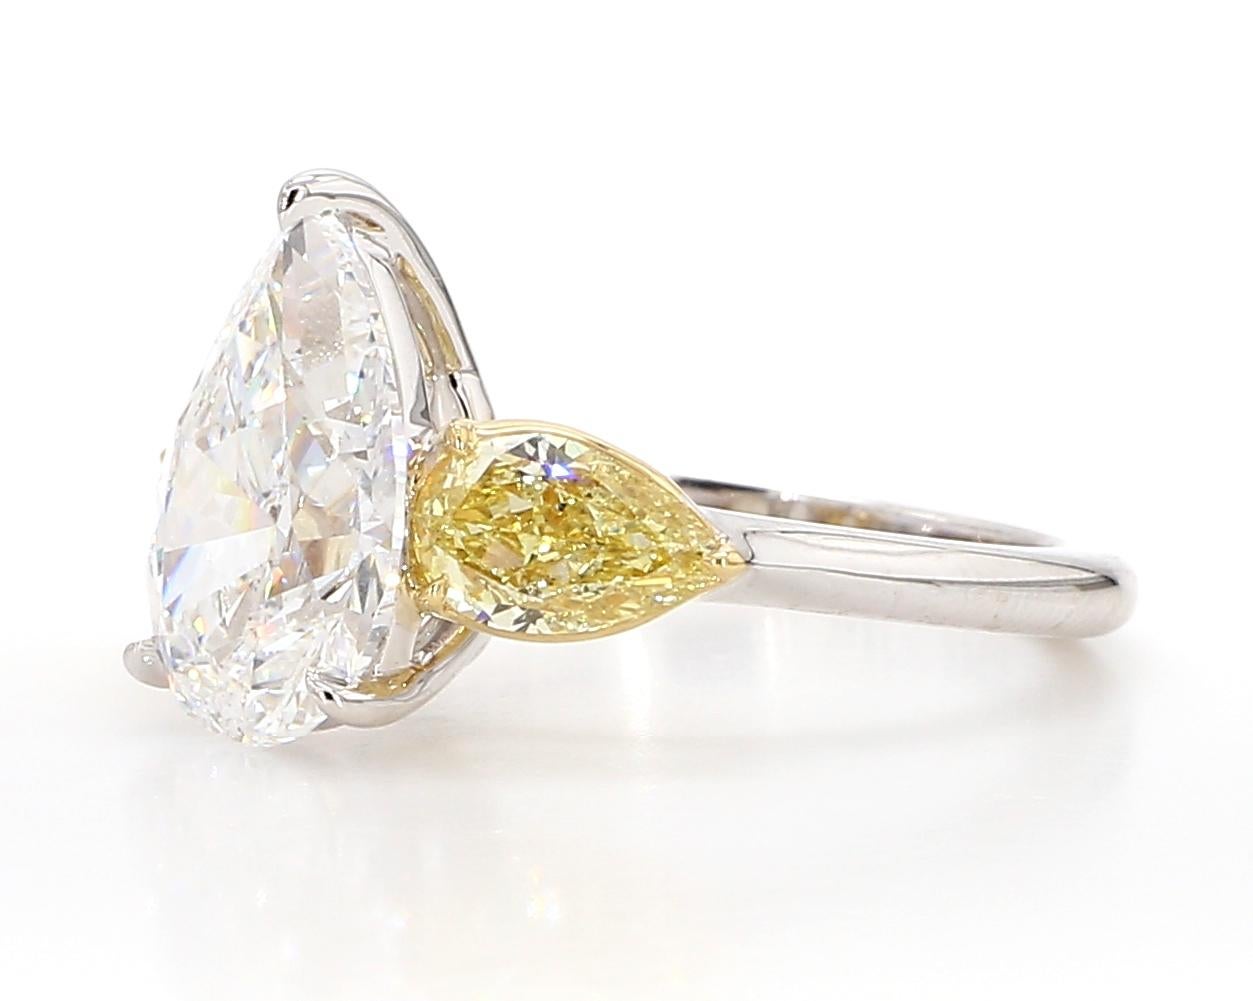 Pear Cut 4.55ct. Pear-Shaped Fancy Yellow & Colorless Diamond Engagement Ring, GIA Report For Sale